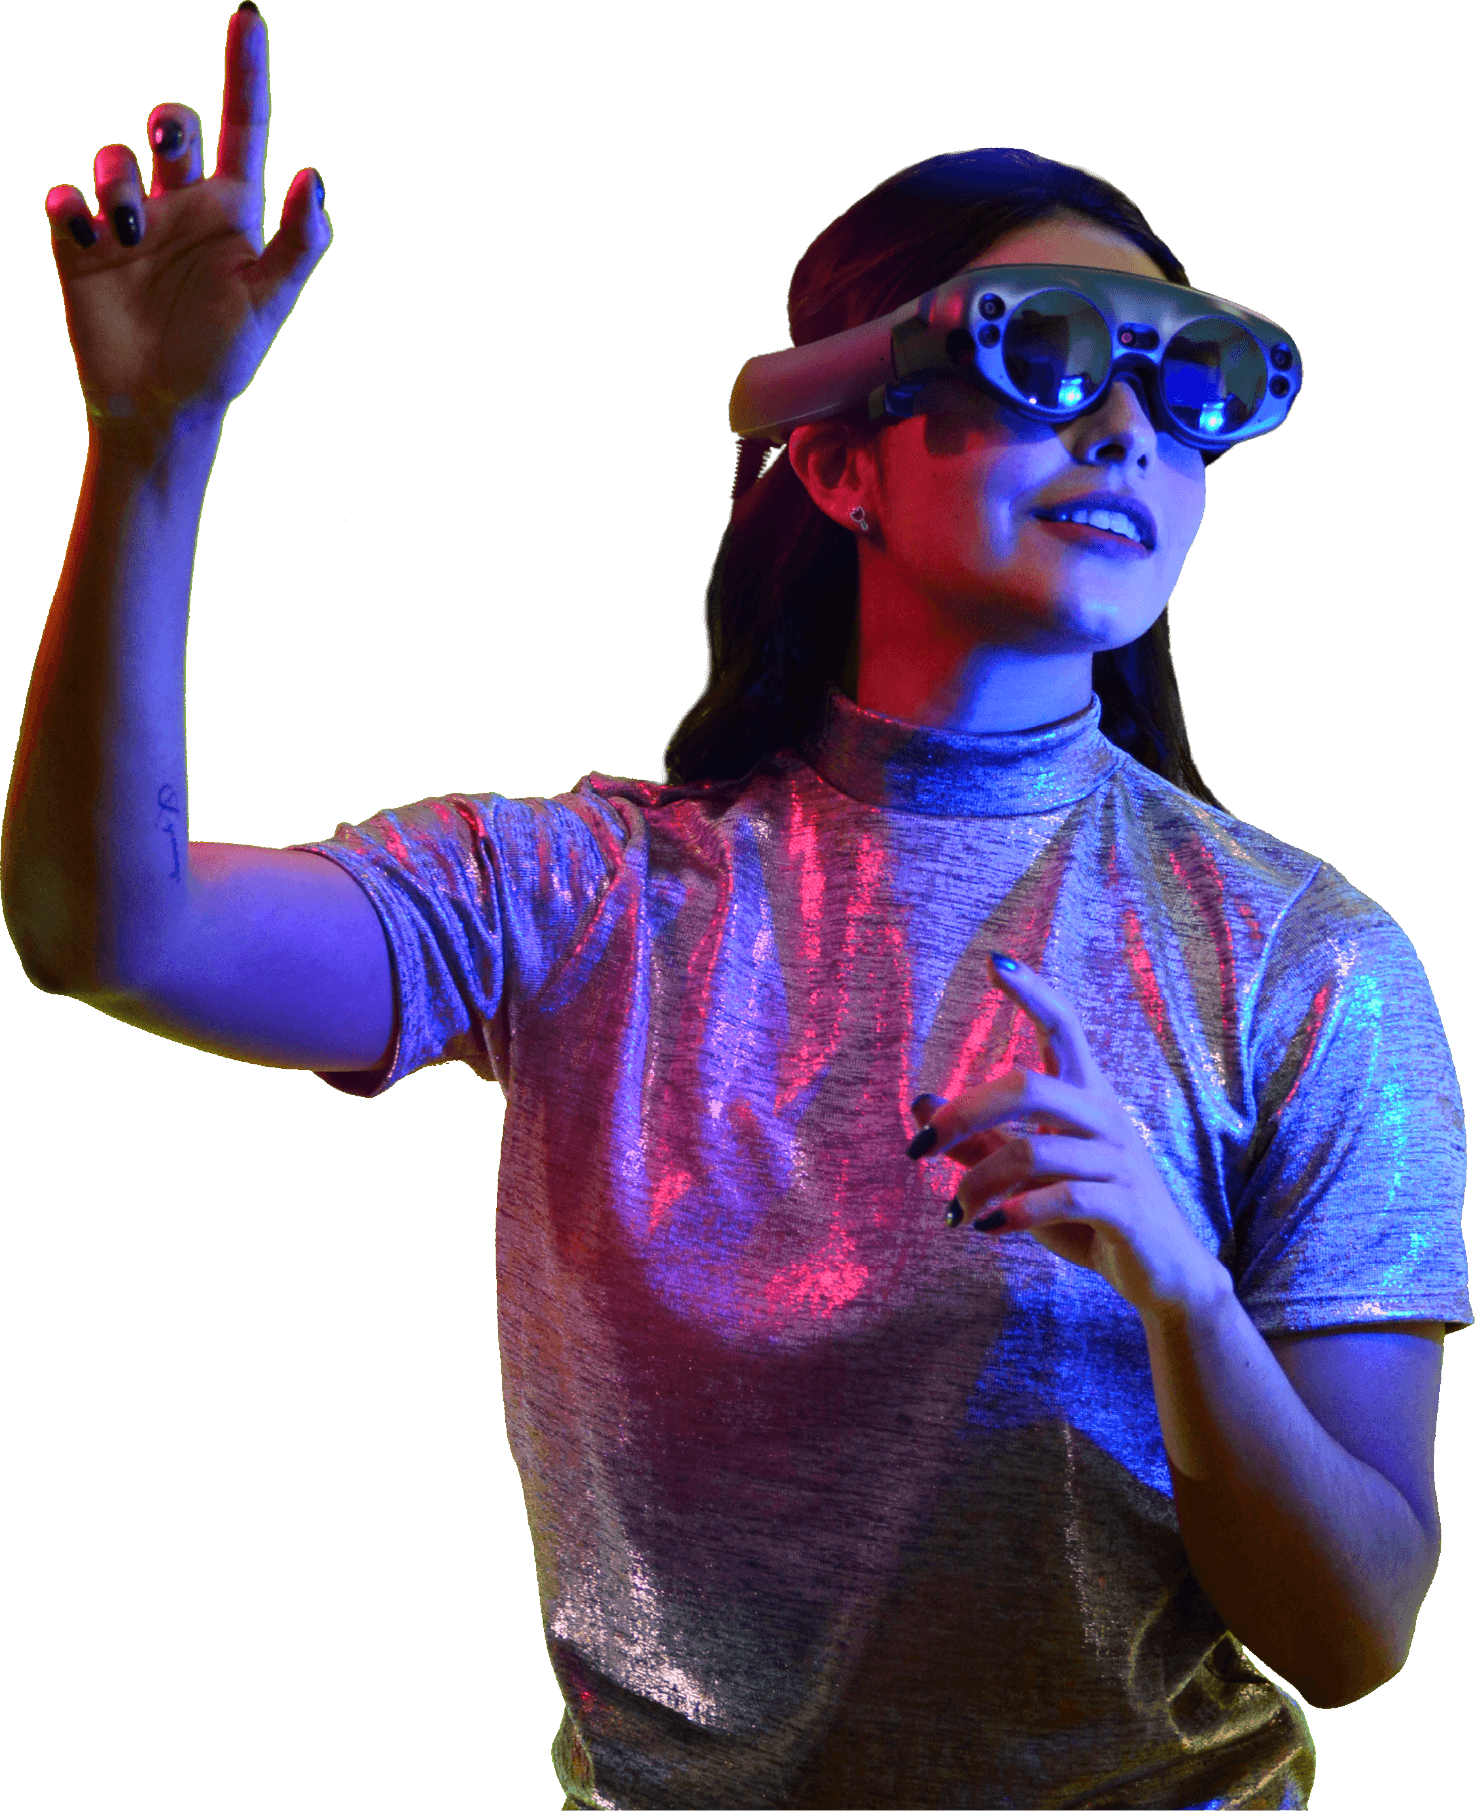 A woman with VR glasses